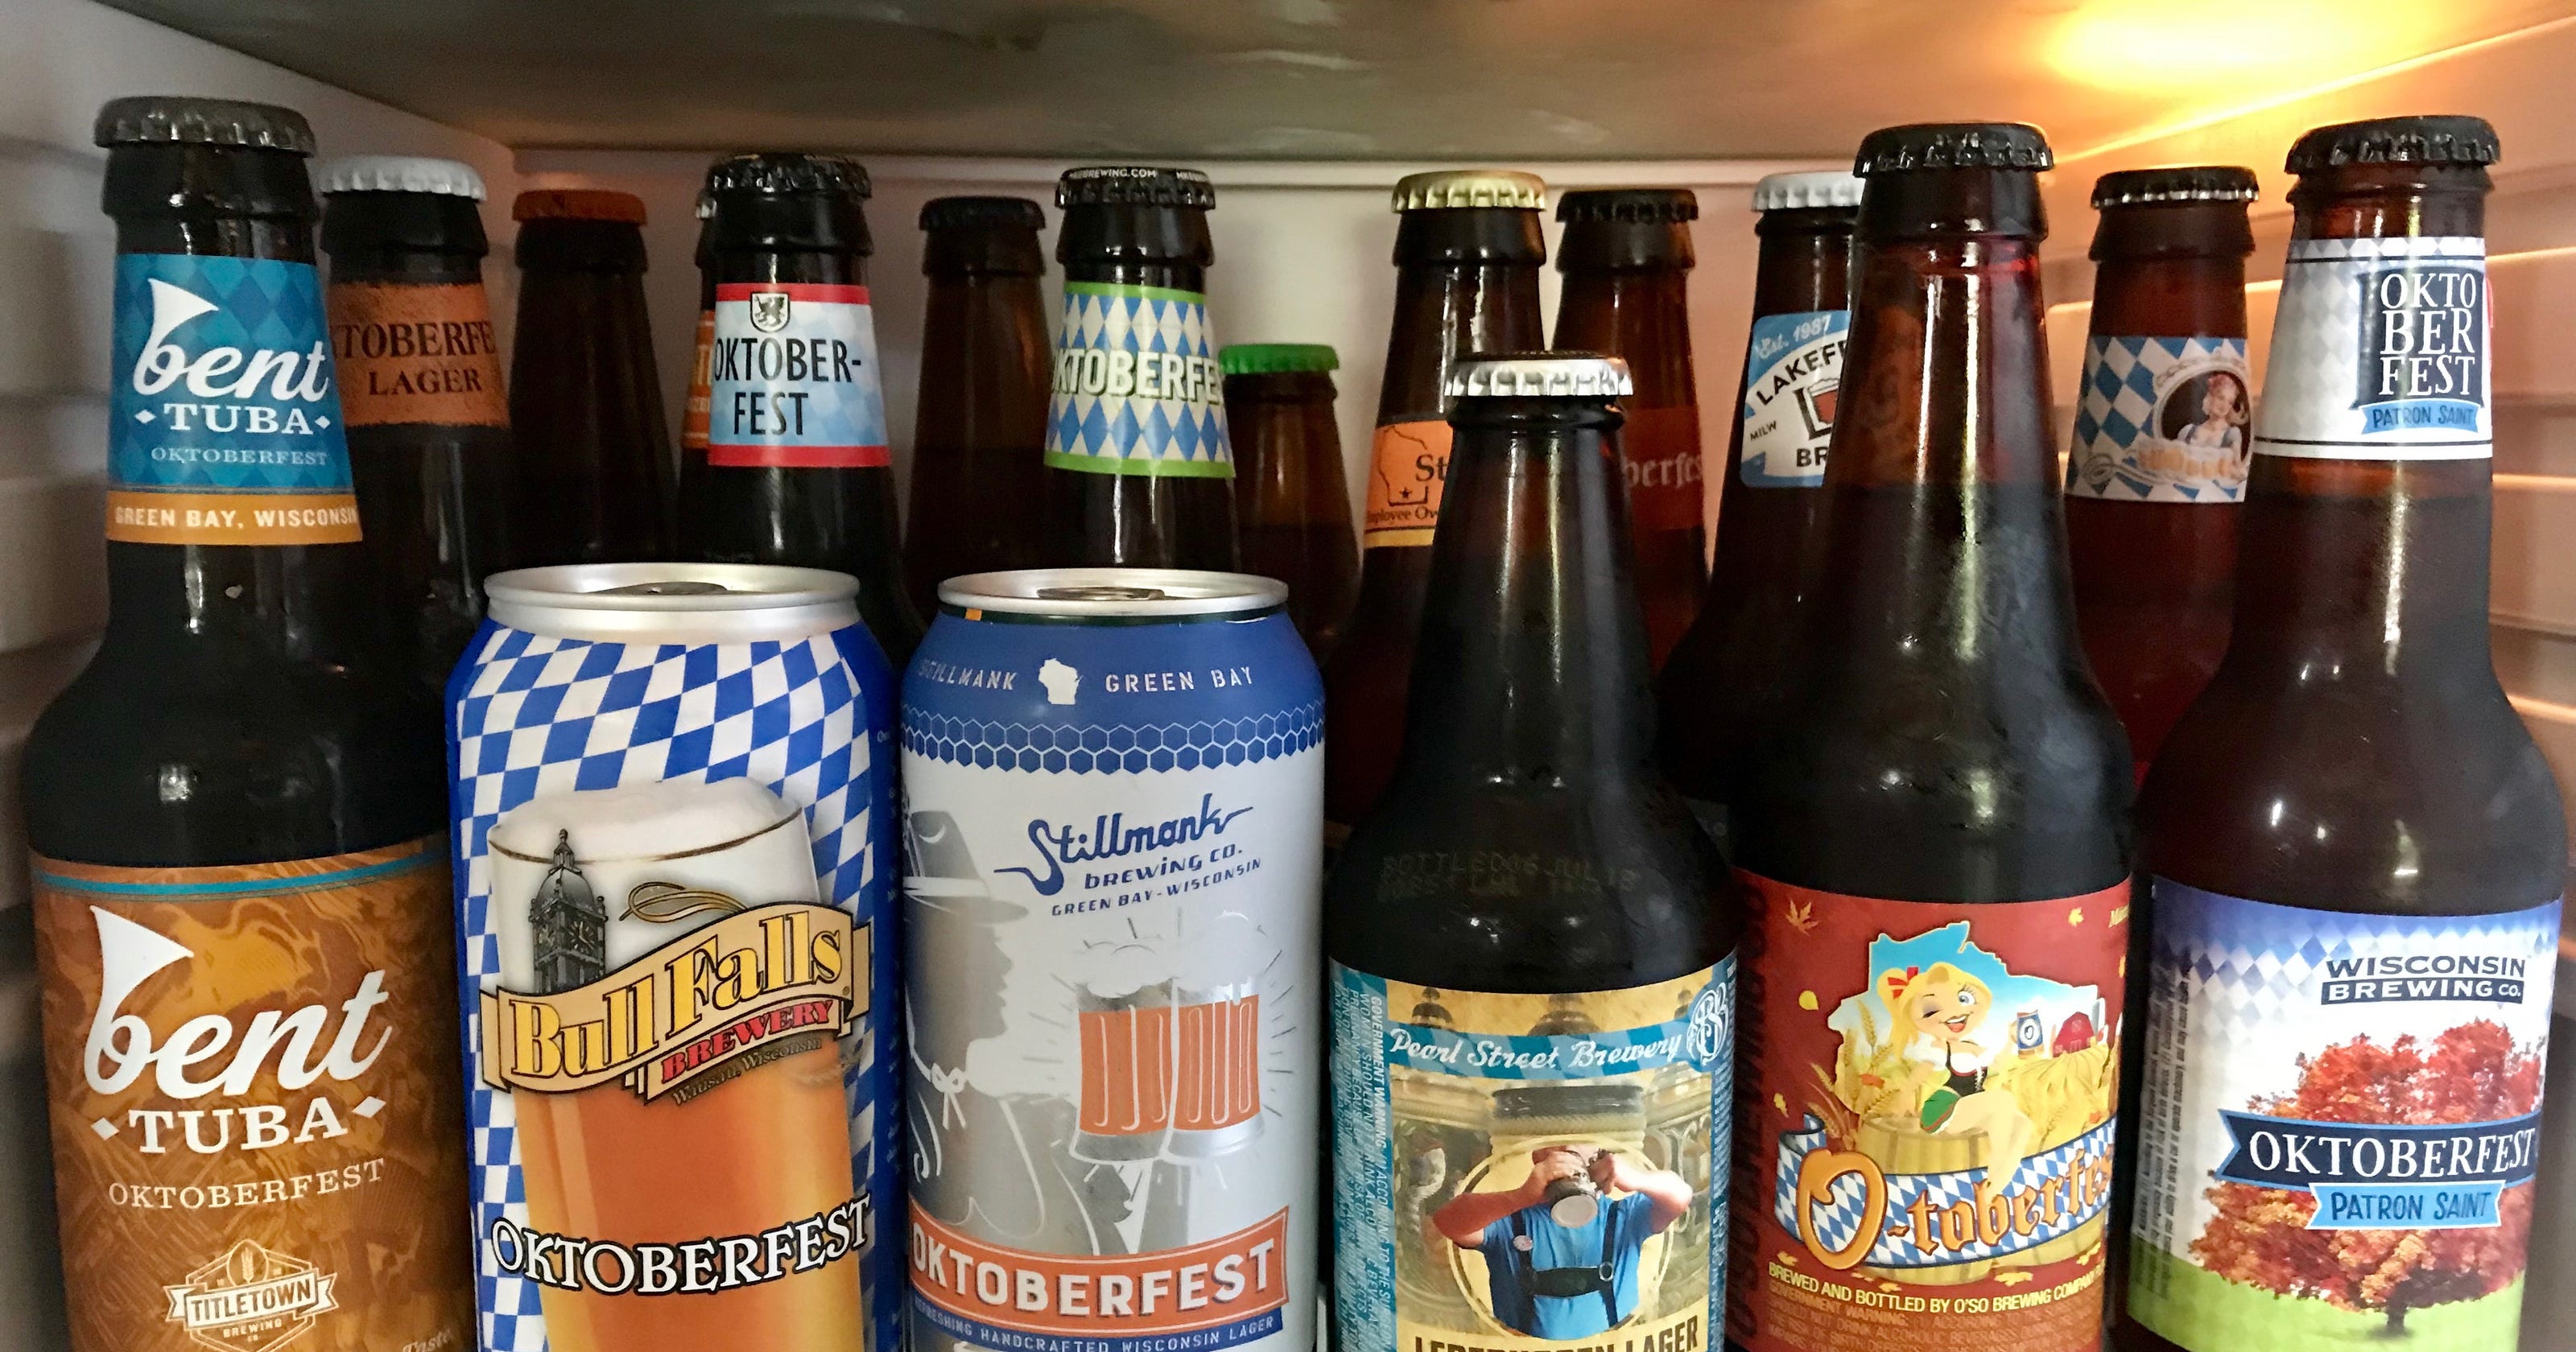 Oktoberfest beer We tested 18 from Wisconsin craft breweries